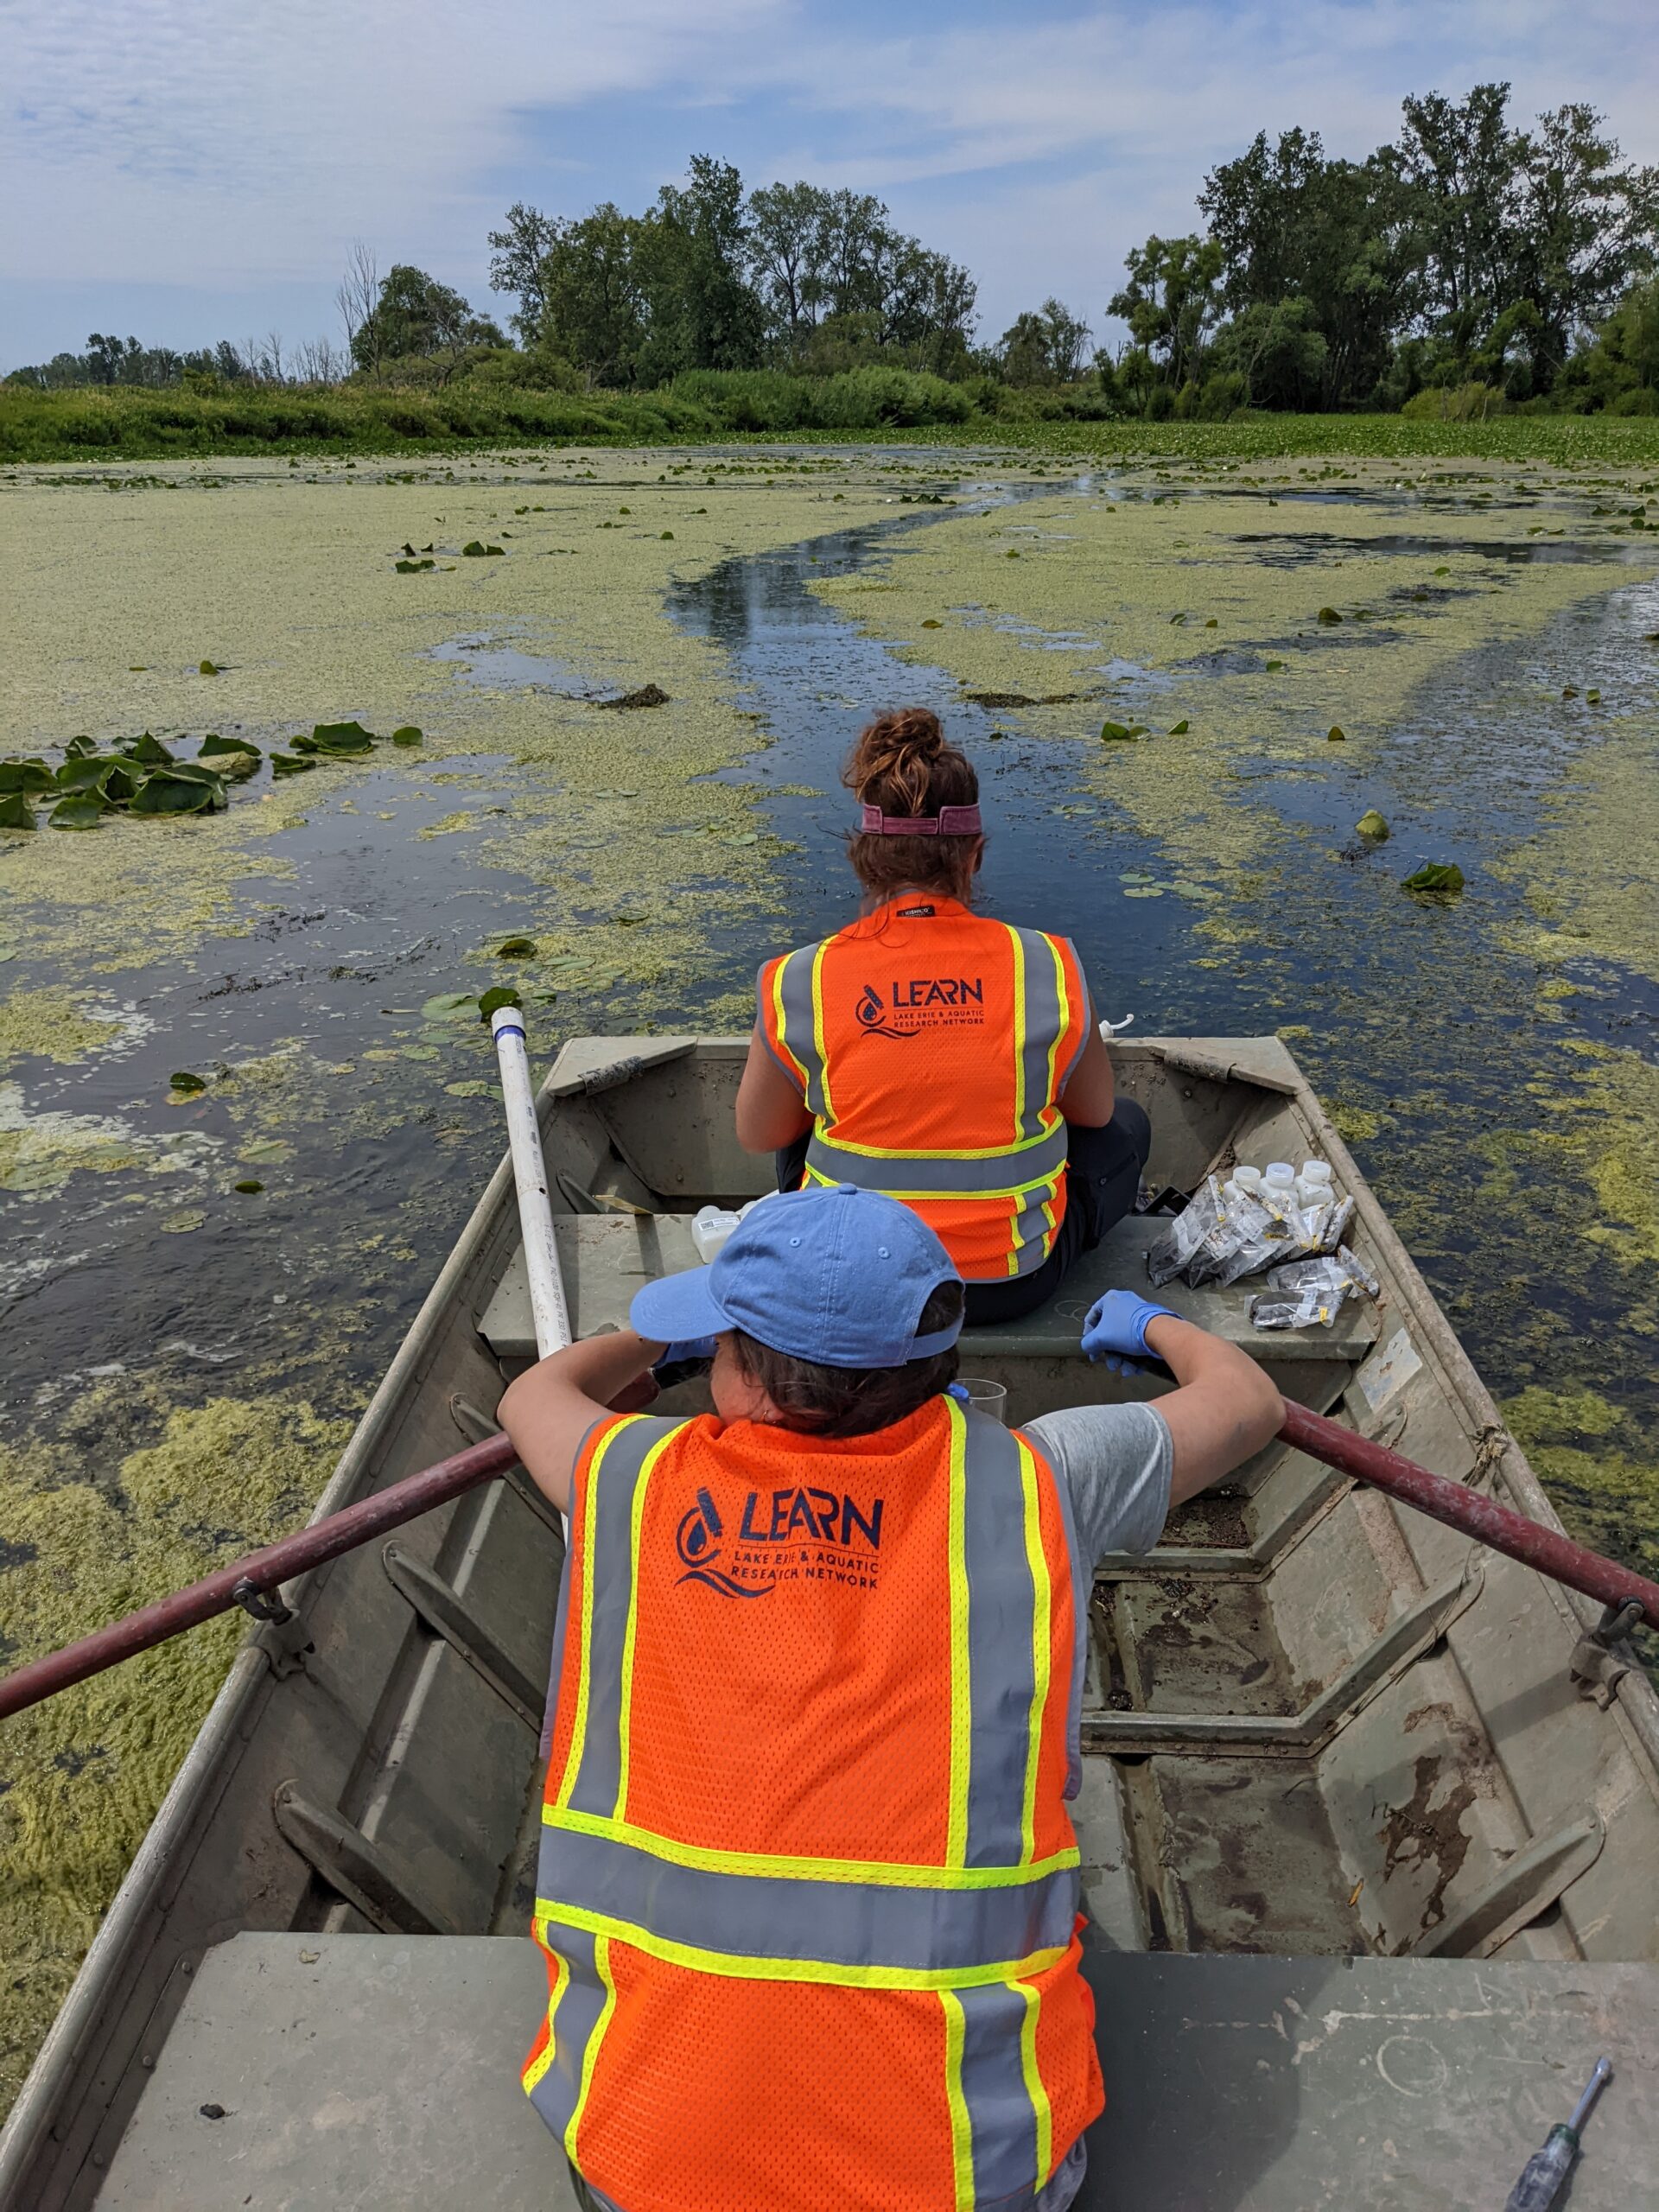 Two people in orange vests are in a gray metal boat on a wetland that has green algae on it.